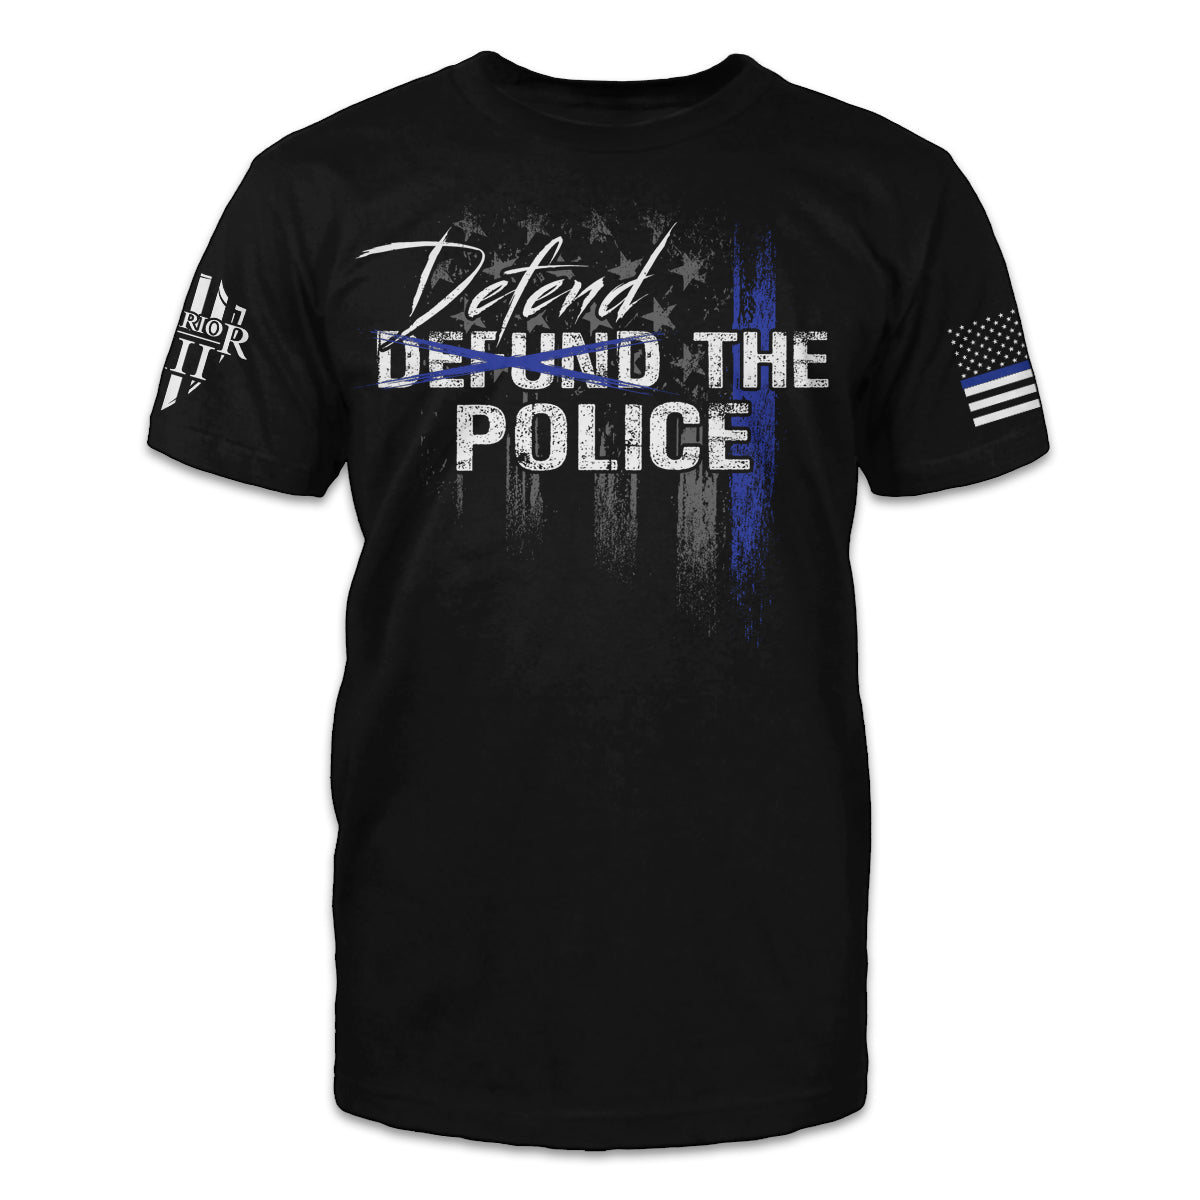 A black t-shirt with the words "Defund the Police" printed on the front.